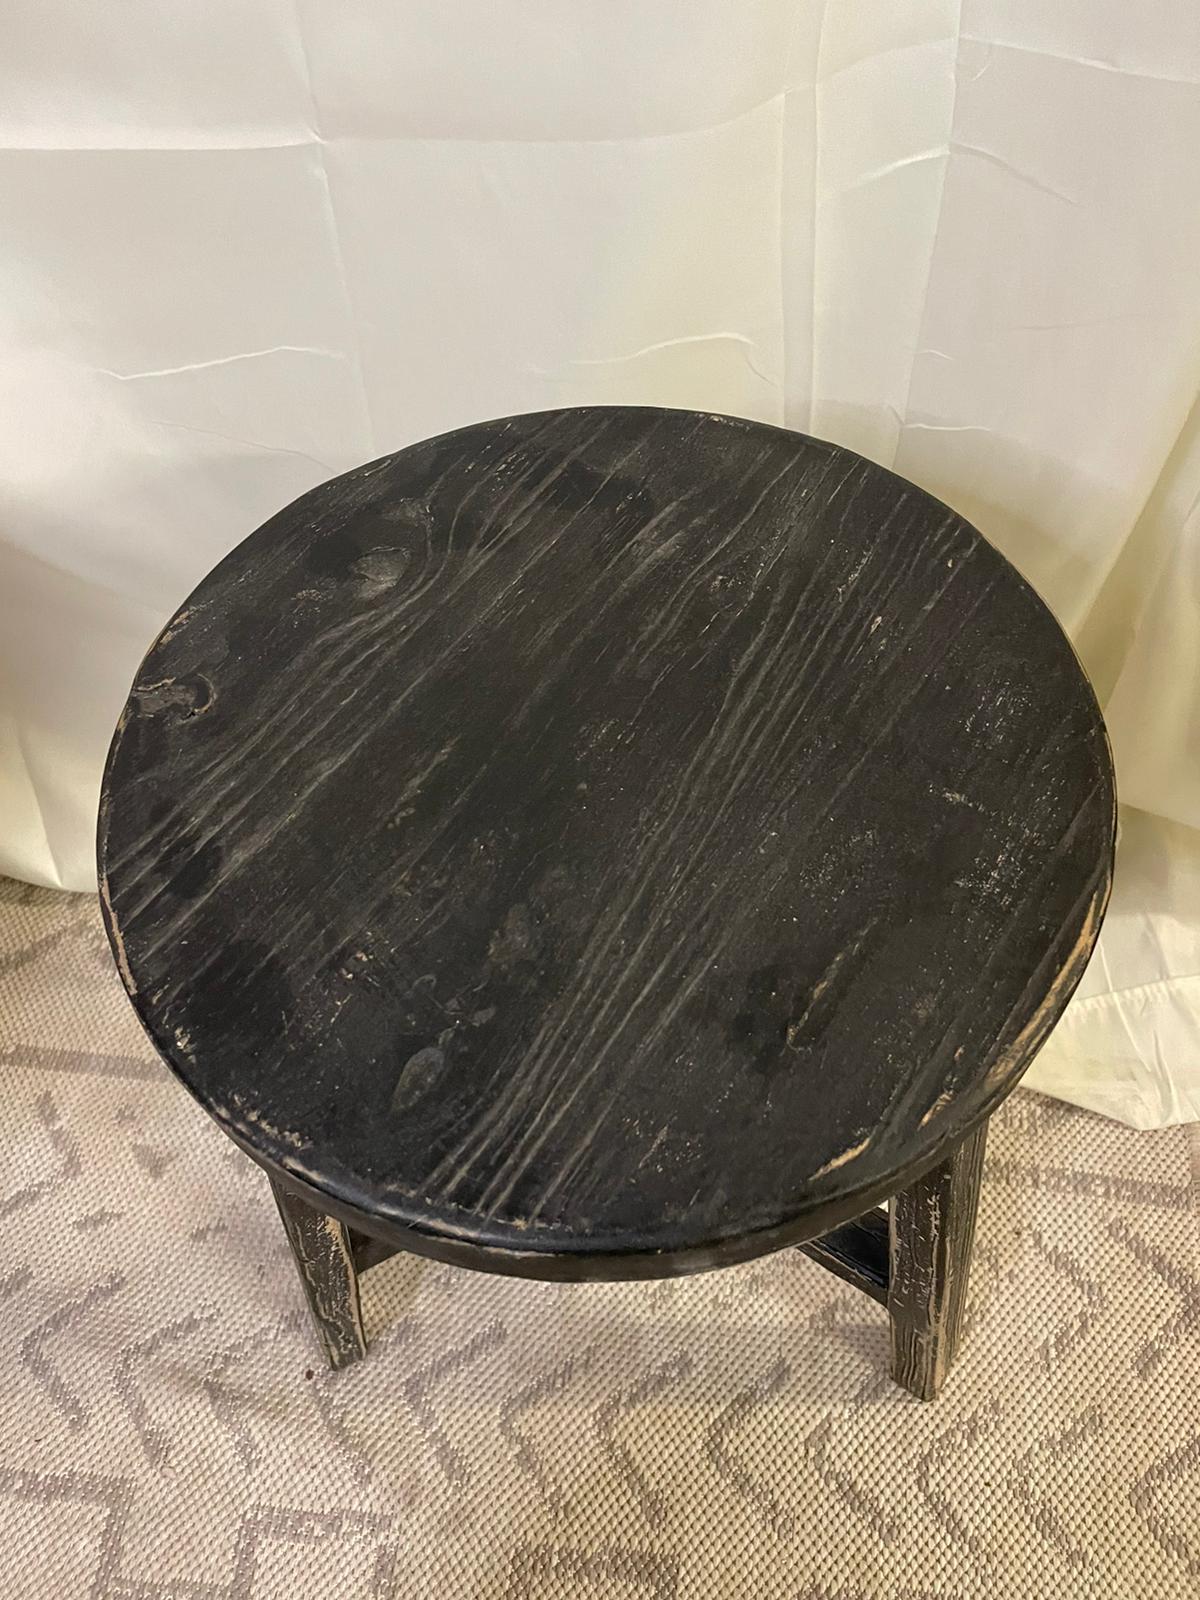 Antique Rustic Vintage Round Stool (Size & Finish Vary)